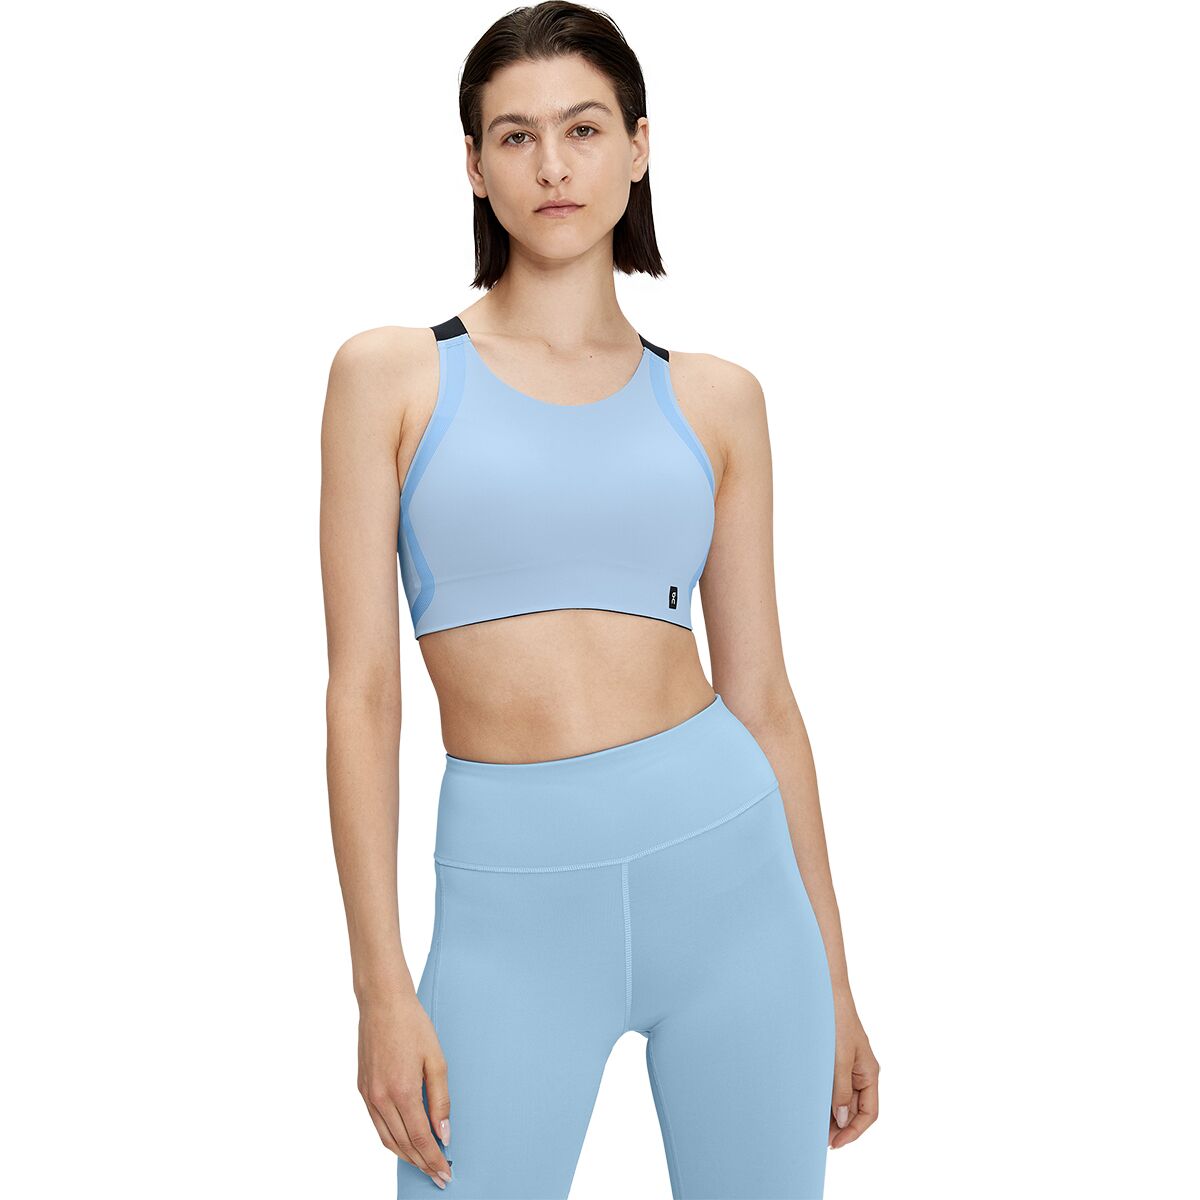 Running, Sports bras, Womens sports clothing, Sports & leisure